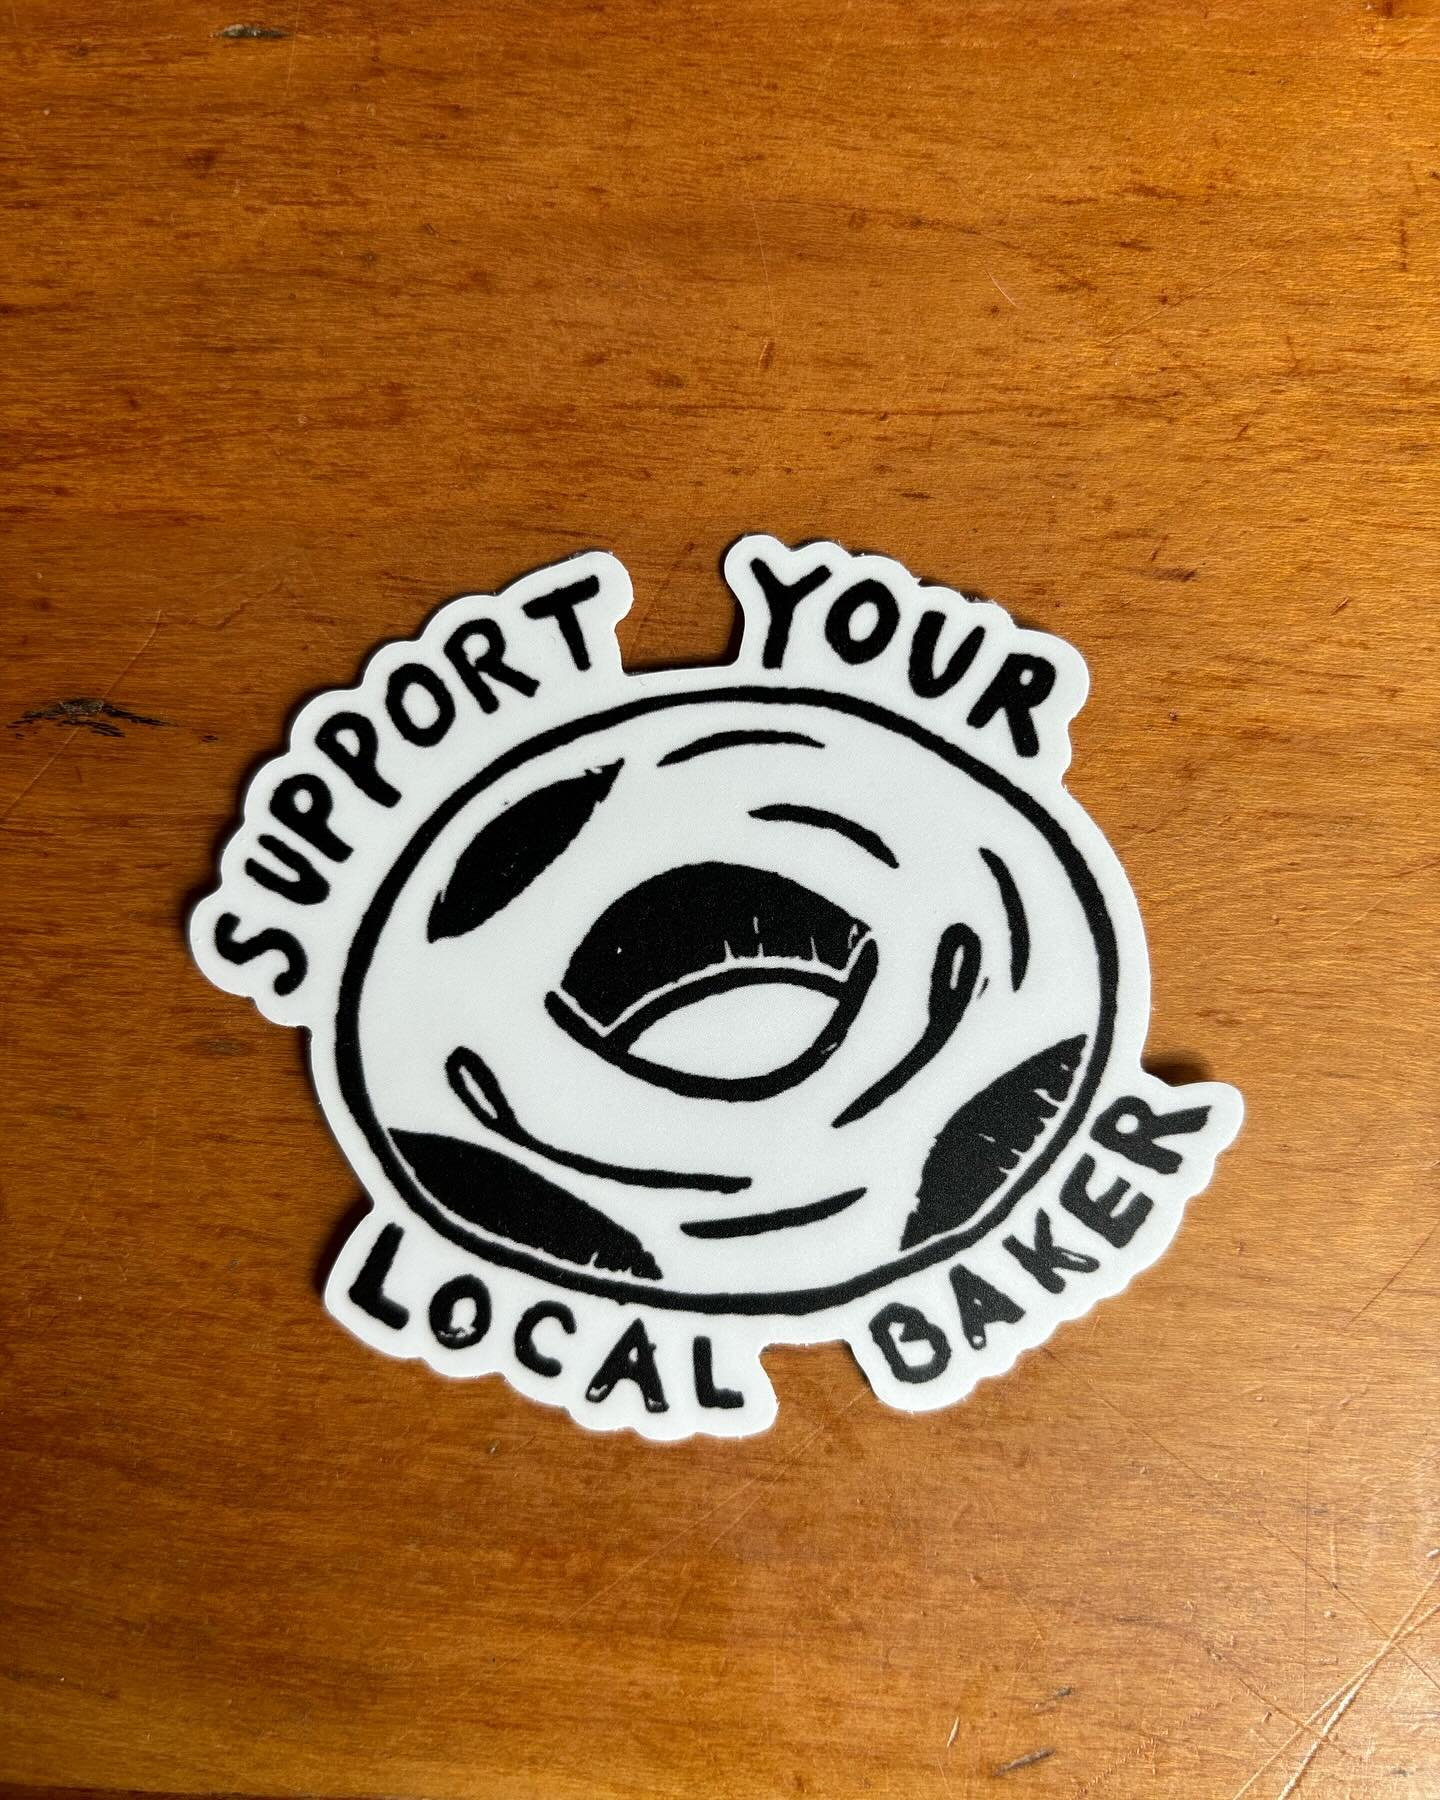 Who wants a sticker?! #supportyourlocalbaker 

#camdenmaine #sourdough #cottagebakery #shoplocal #smallbusiness #womanowned #midcoastmaine #madeinmaine #mainemade #maine #vacationland #sourdoughbagels #bagels